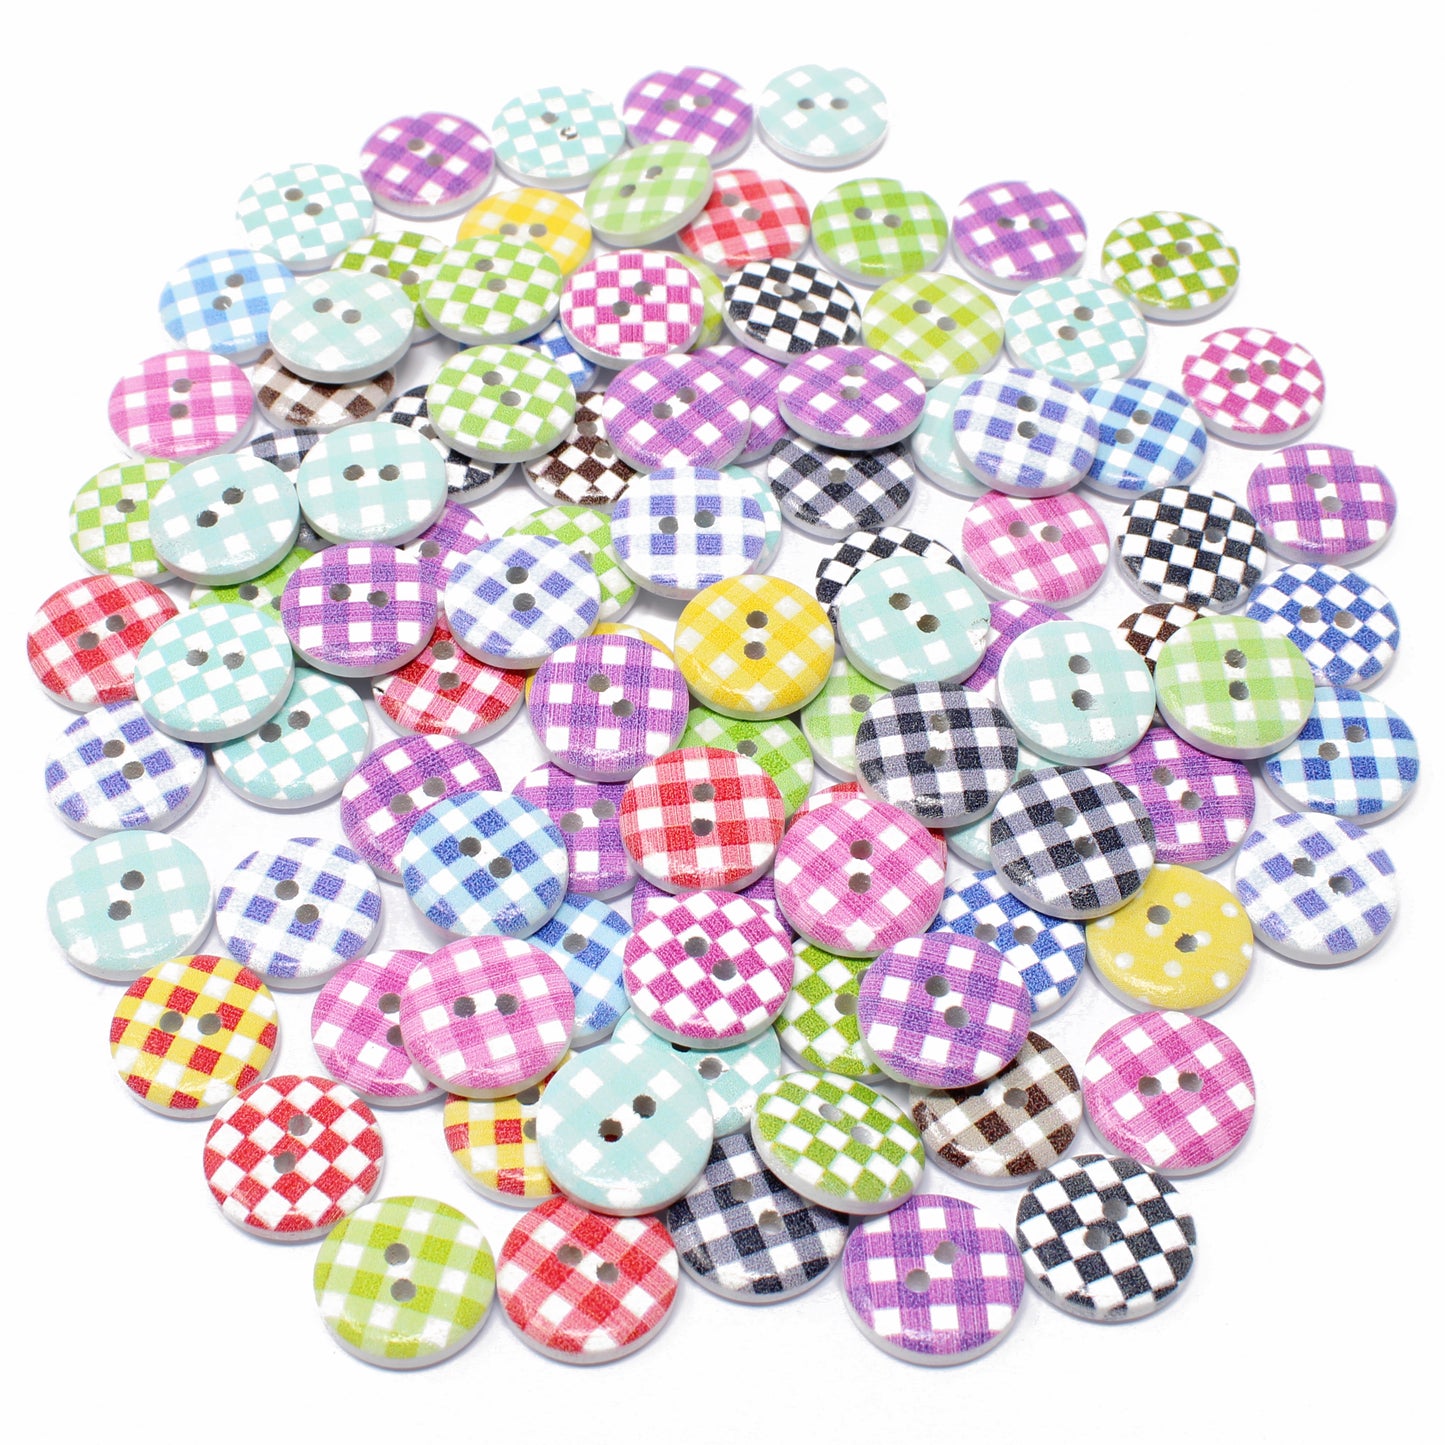 Checked 100 Mixed 15mm Round Wooden Craft Buttons